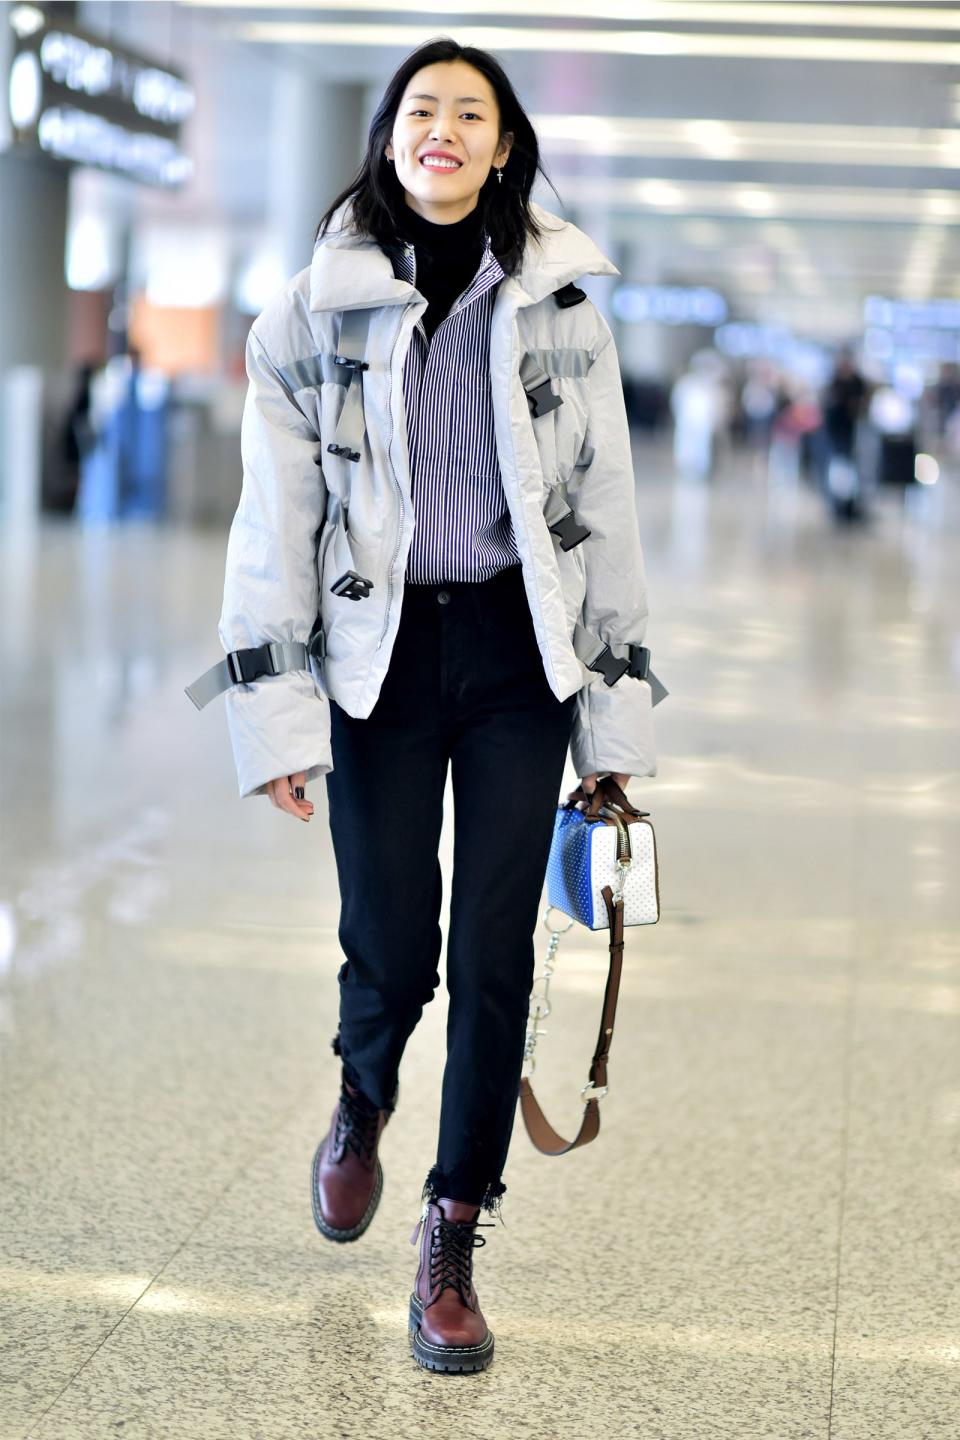 Simple base layers make airport accessories look all the more elevated, like Liu Wen's strappy jacket and box bag over black pants and a turtleneck.